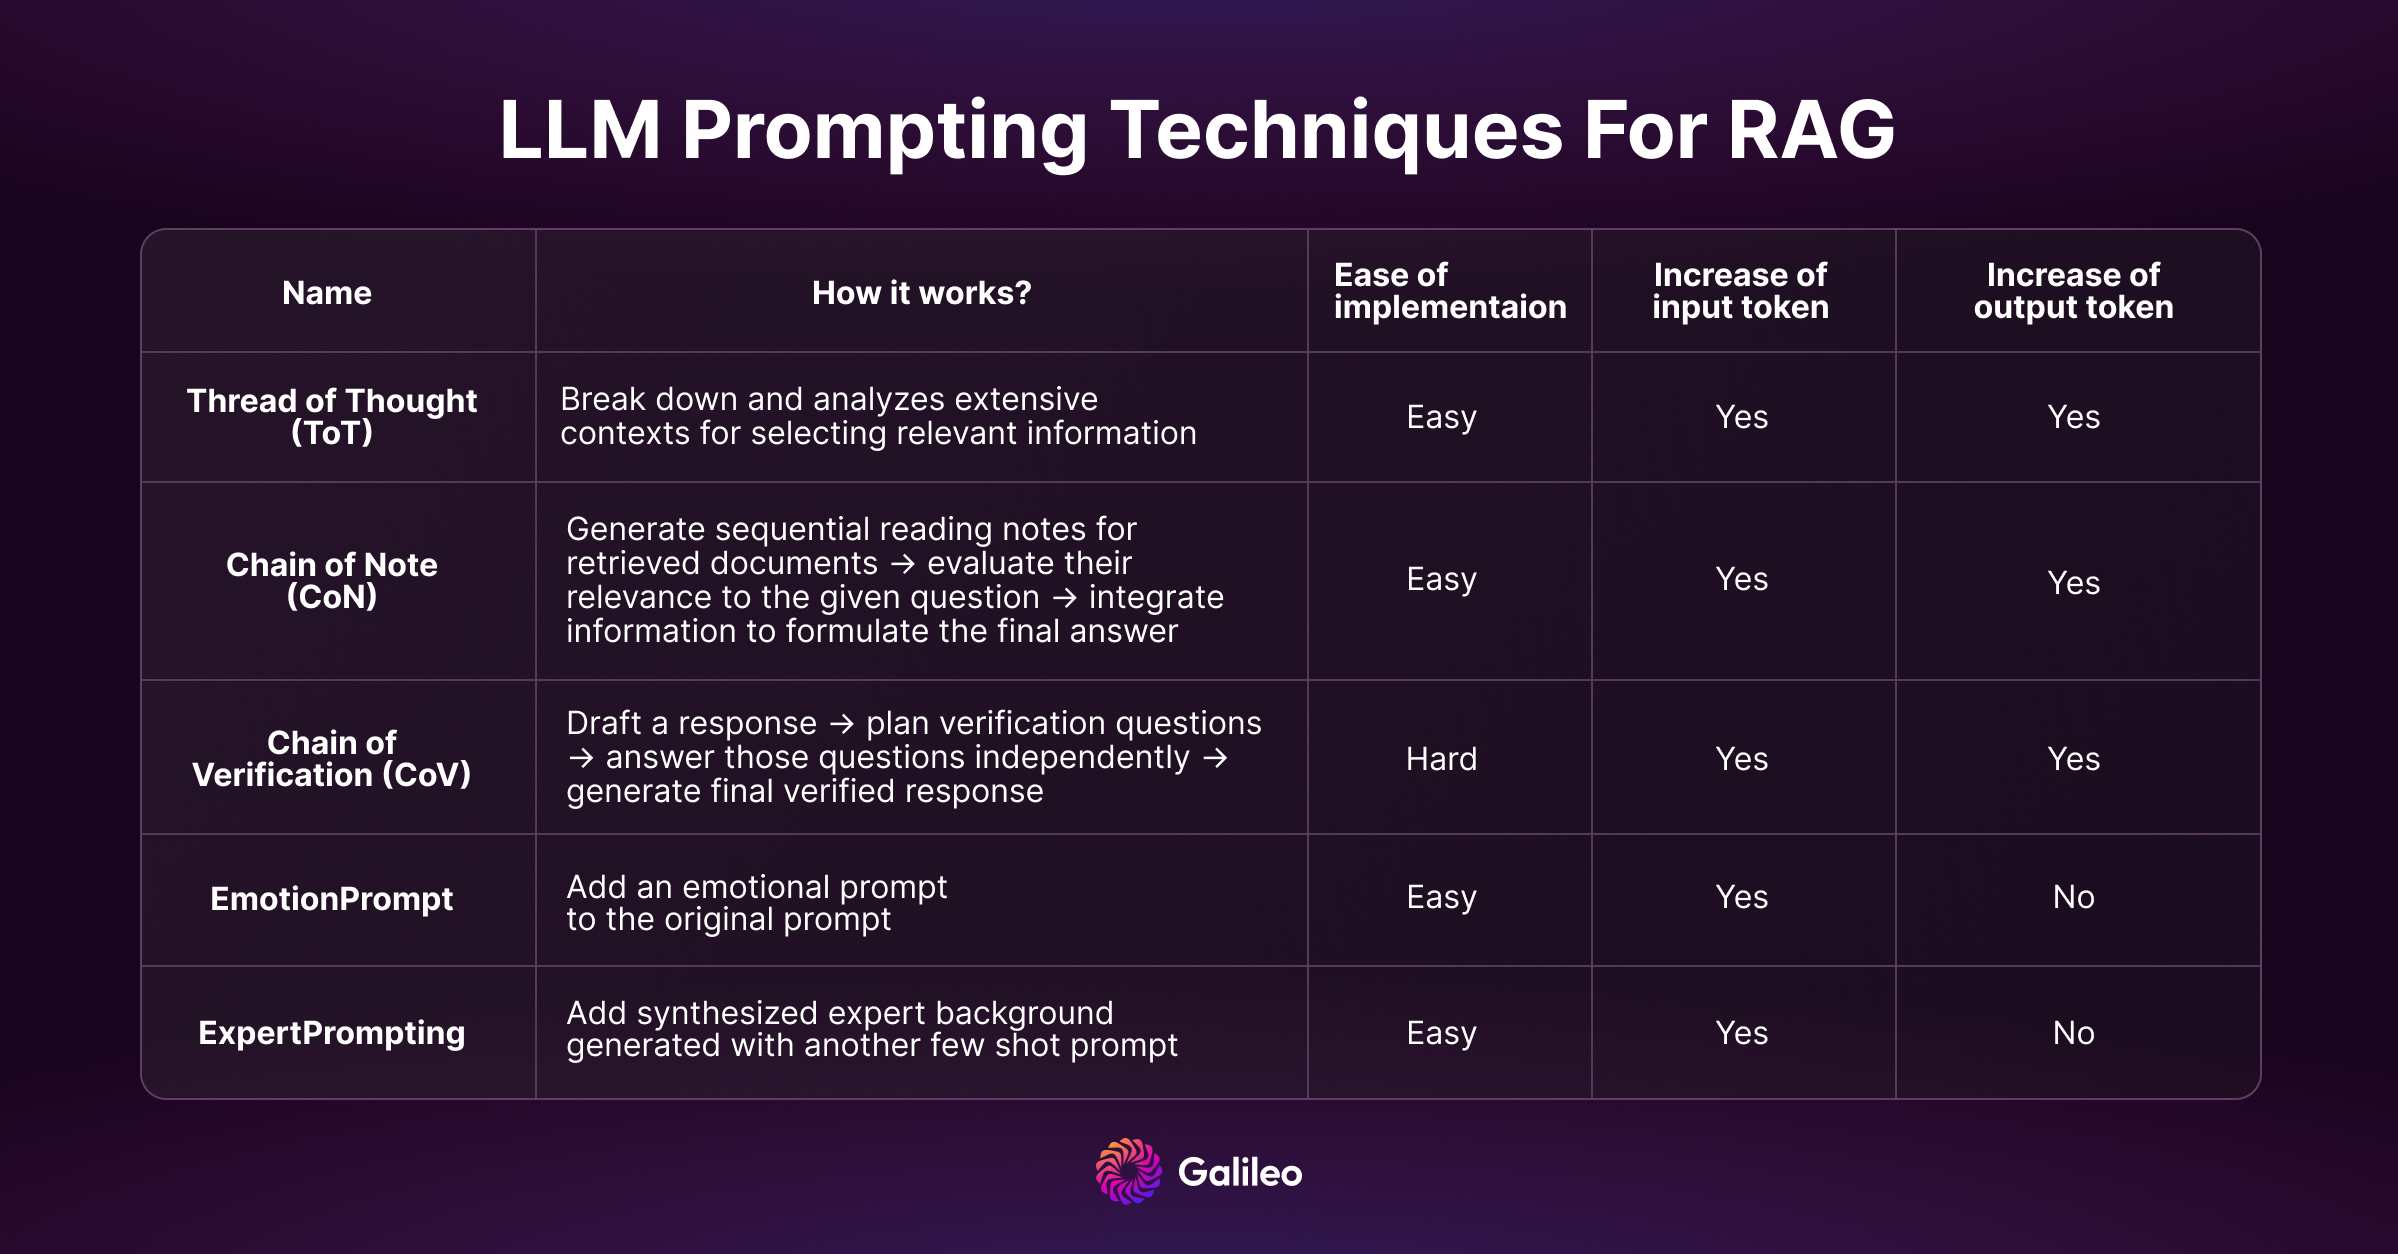 LLM Prompting Techniques For RAG